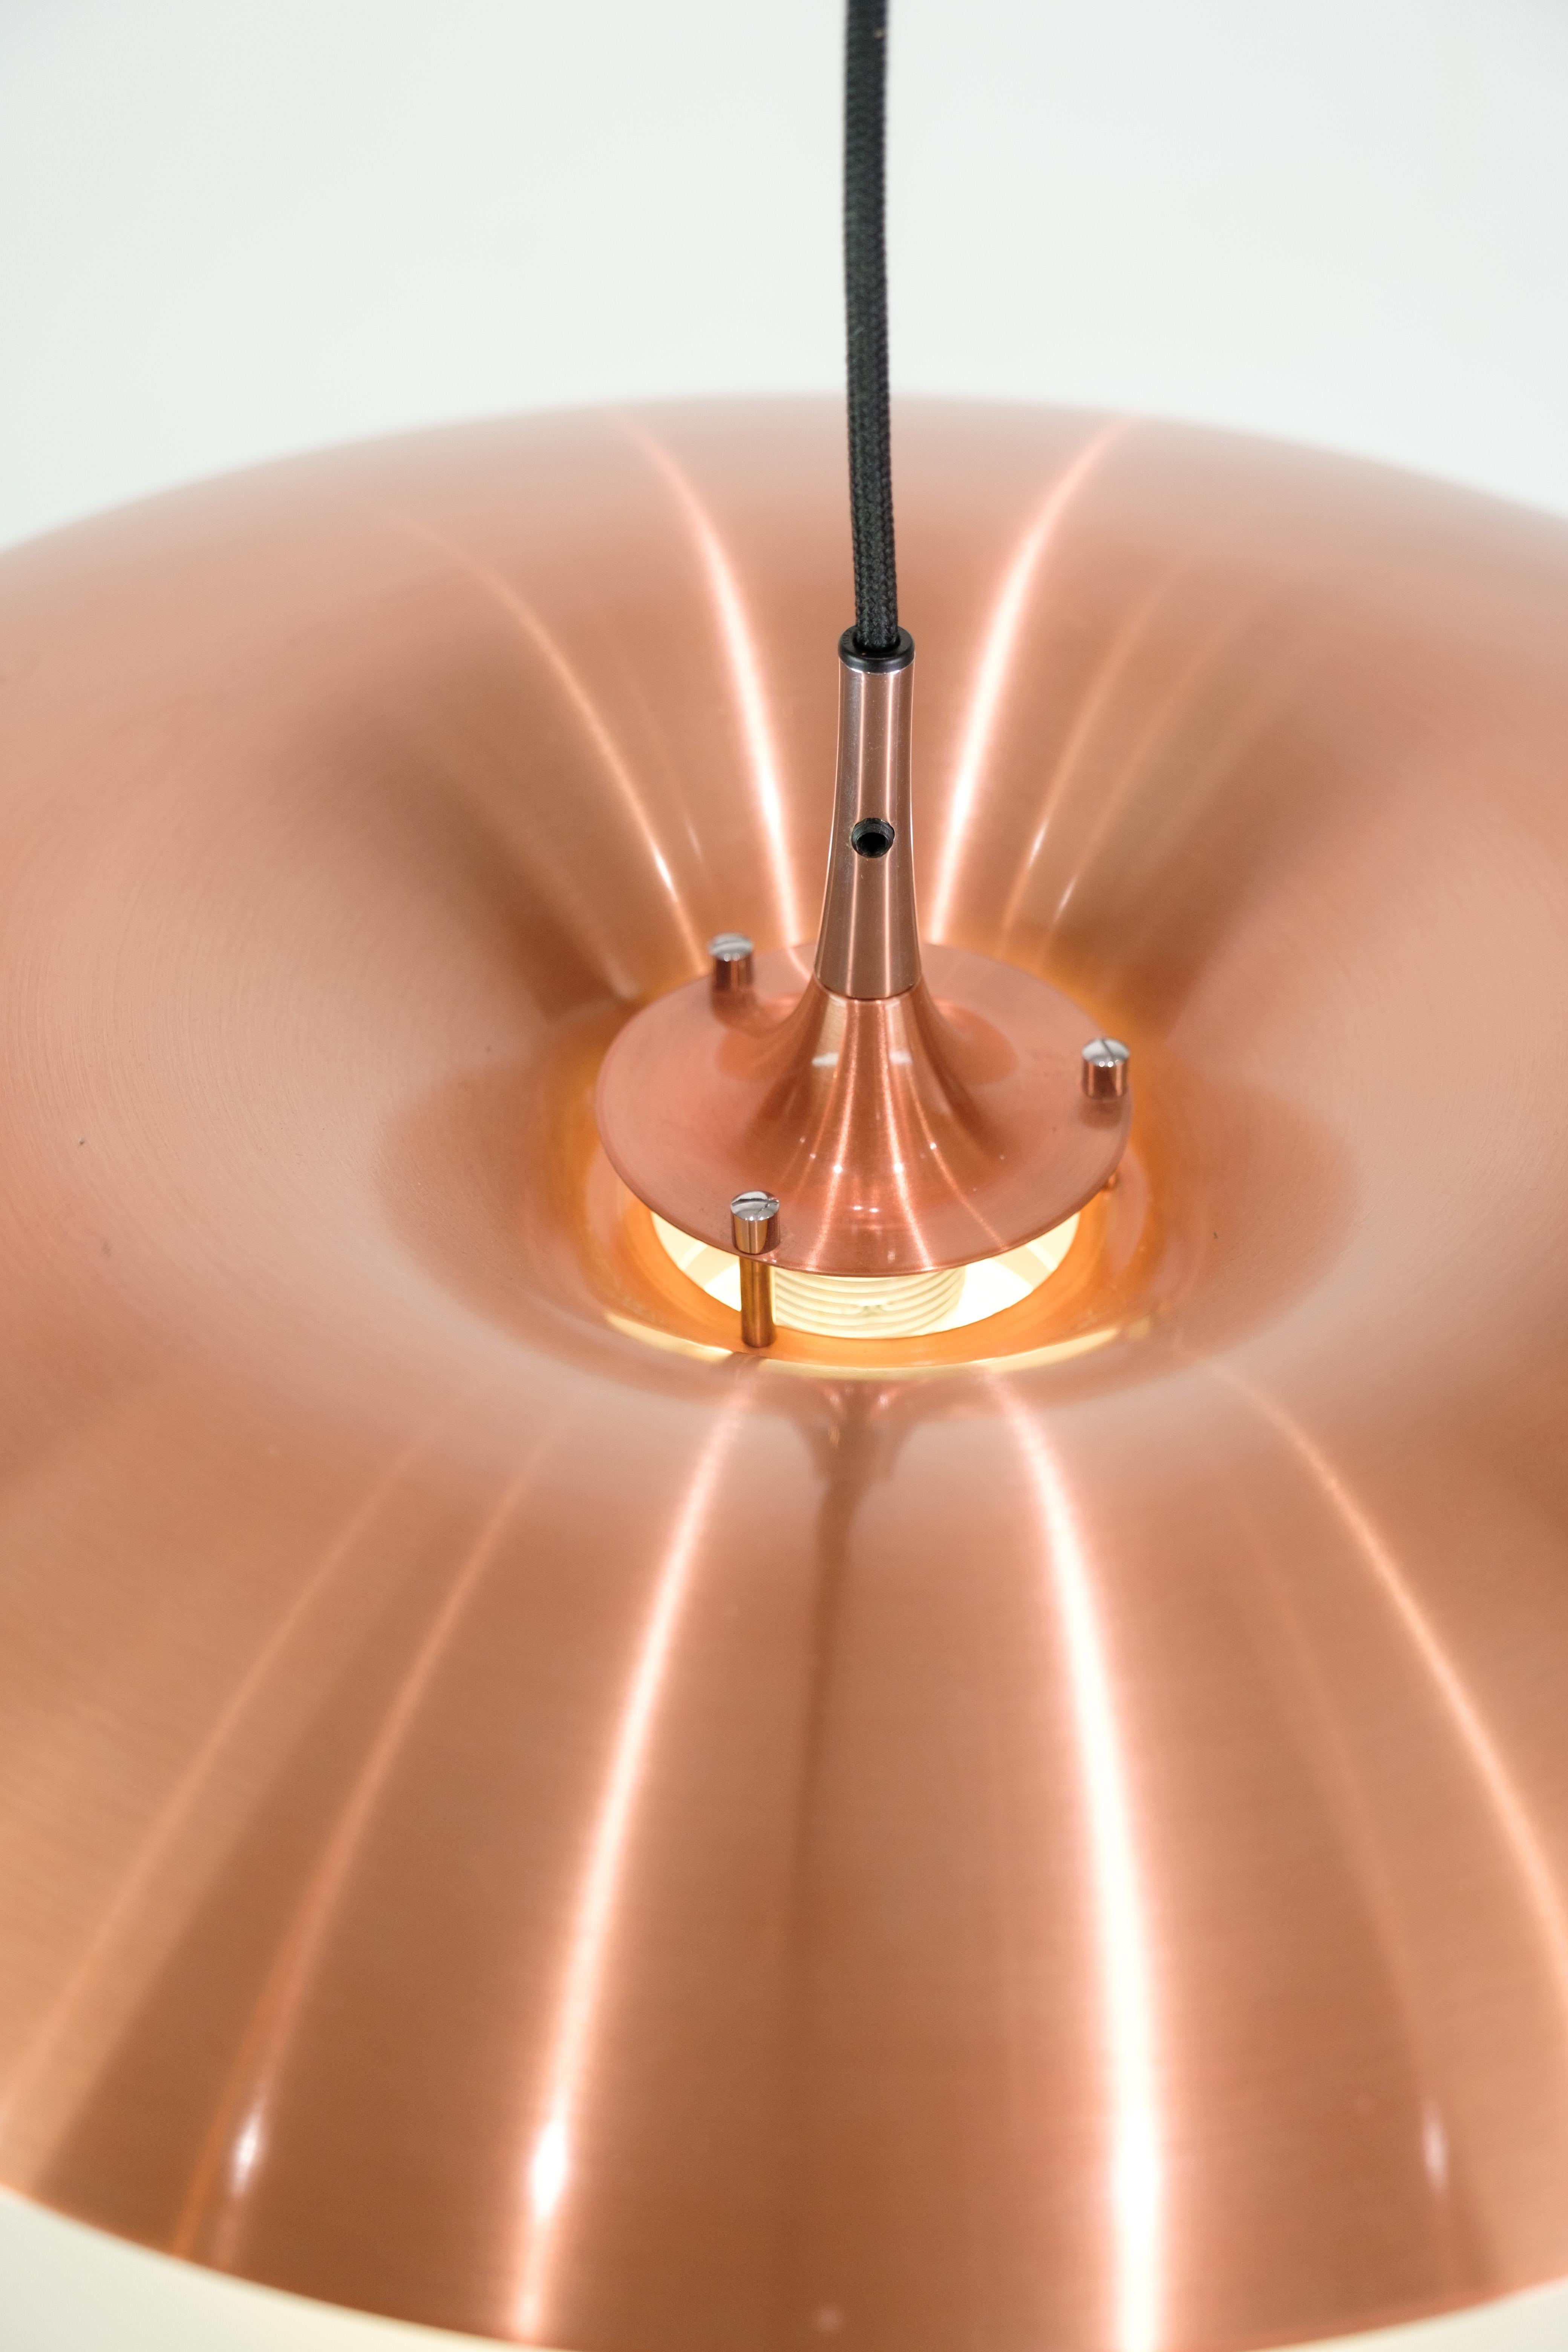 The Diablo lamp, designed by Joakim Fihn and produced in Varberg Sweden with copper shades. The lamp uses a compatible bulb and has energy class a - E.
H:20 Dia:50